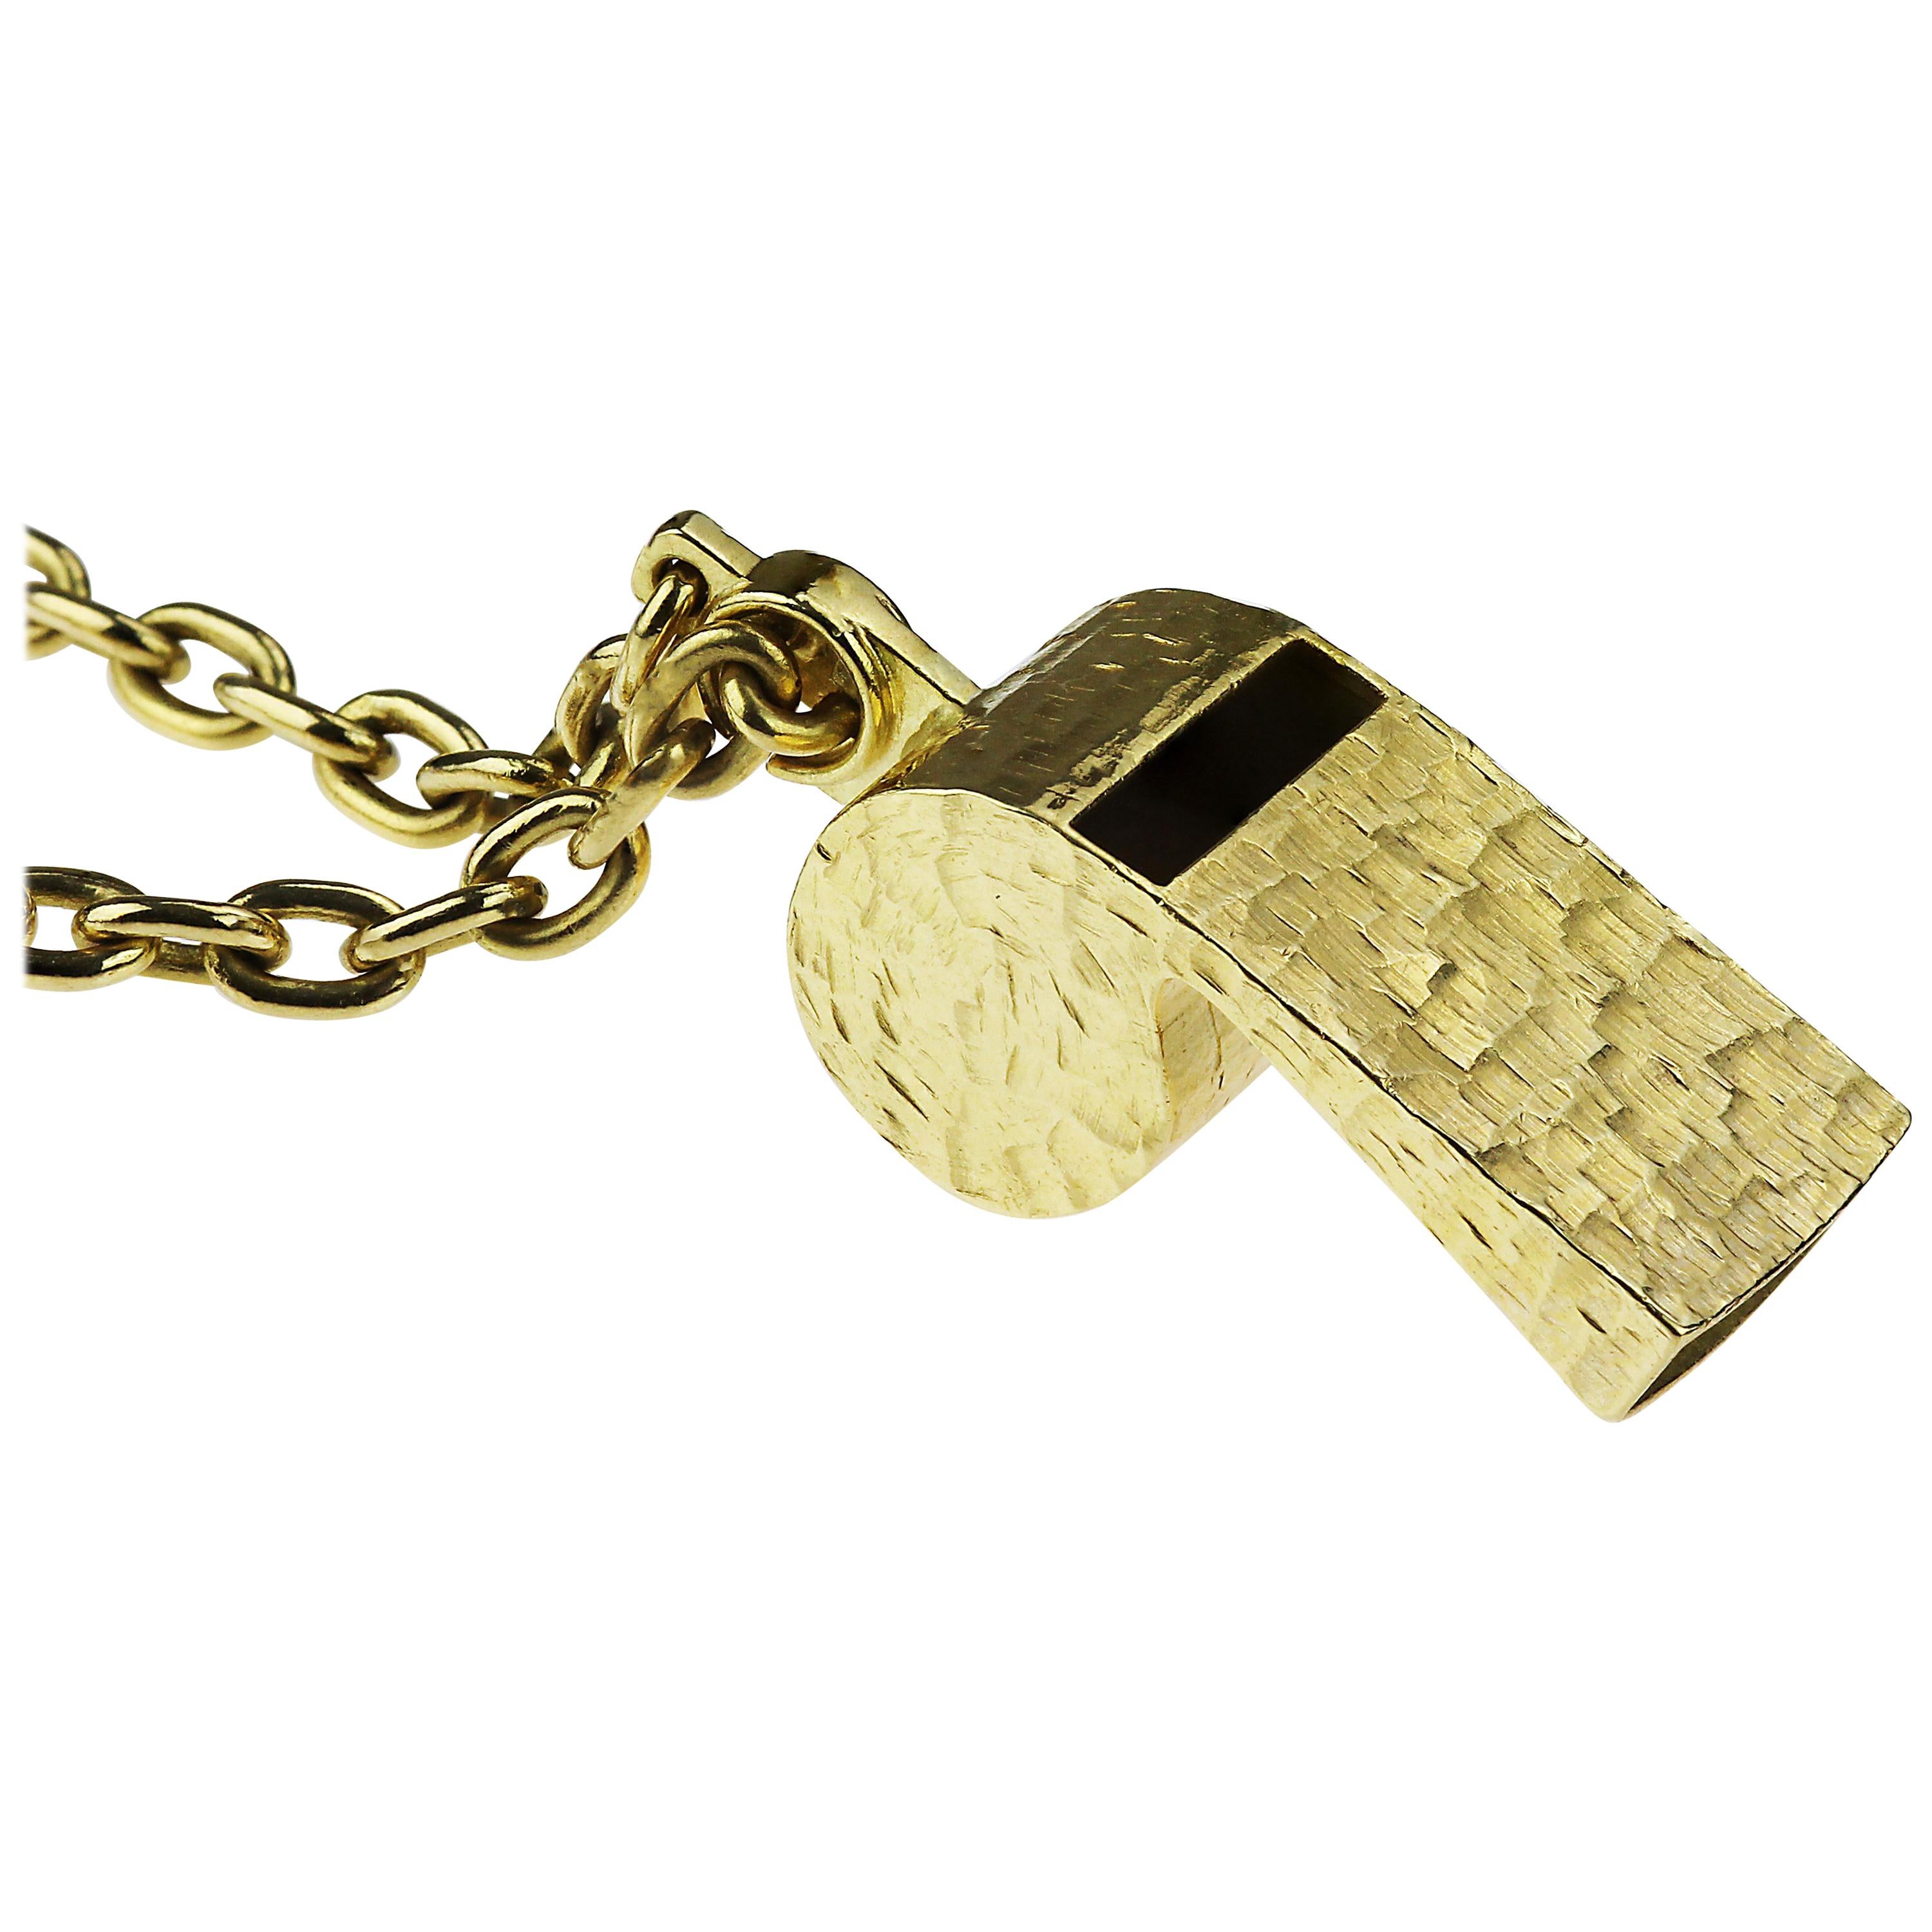 Famous Designer Andrew Grima Whistle Key Ring in 18 Carat Gold Limited Pieces